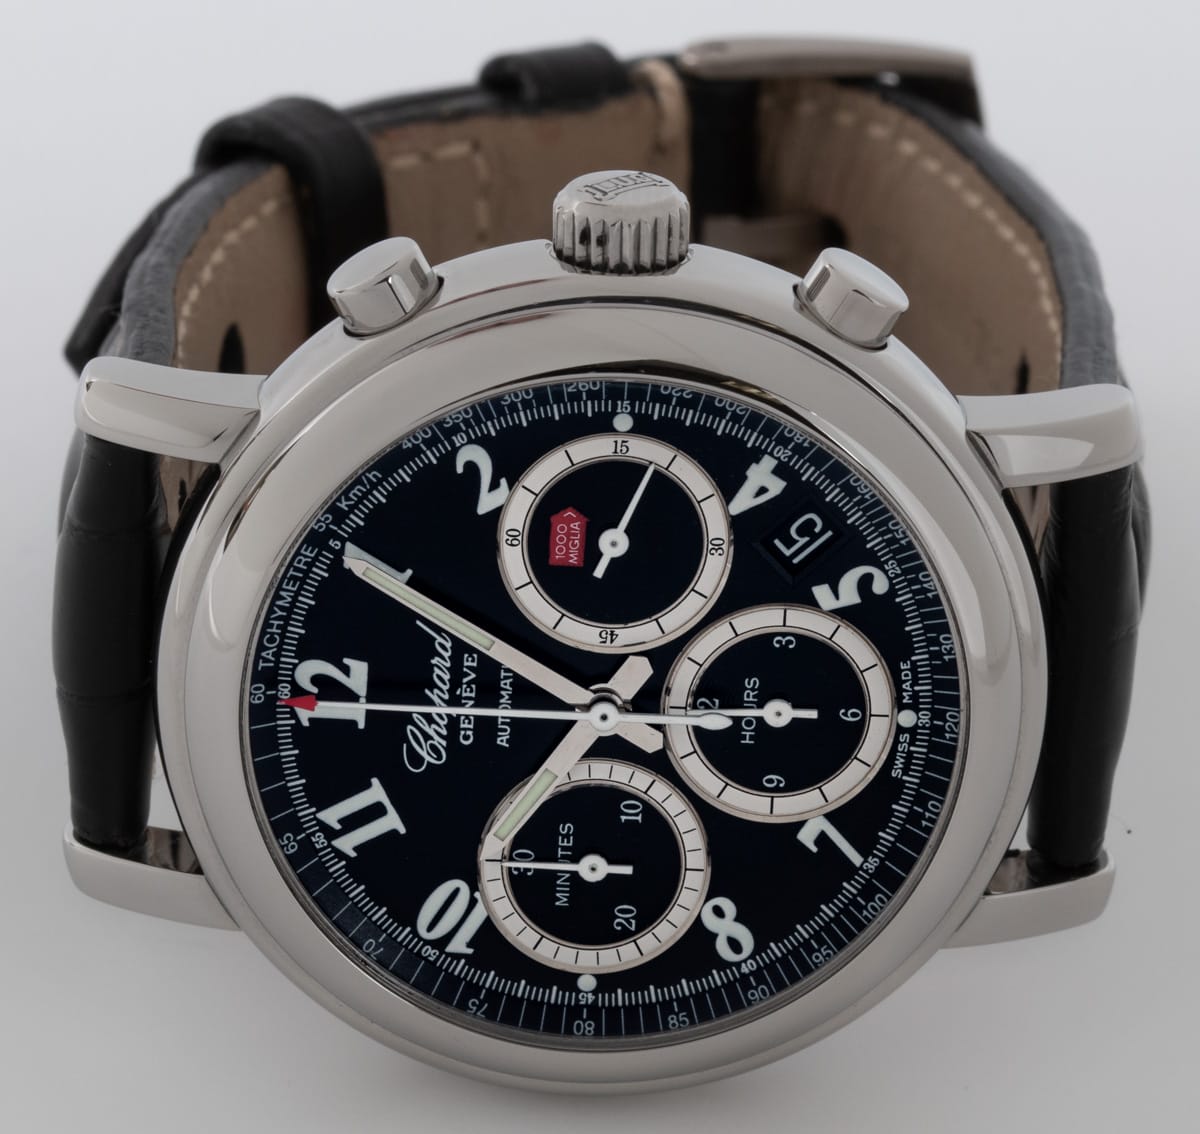 Front View of Mille Miglia Chronograph